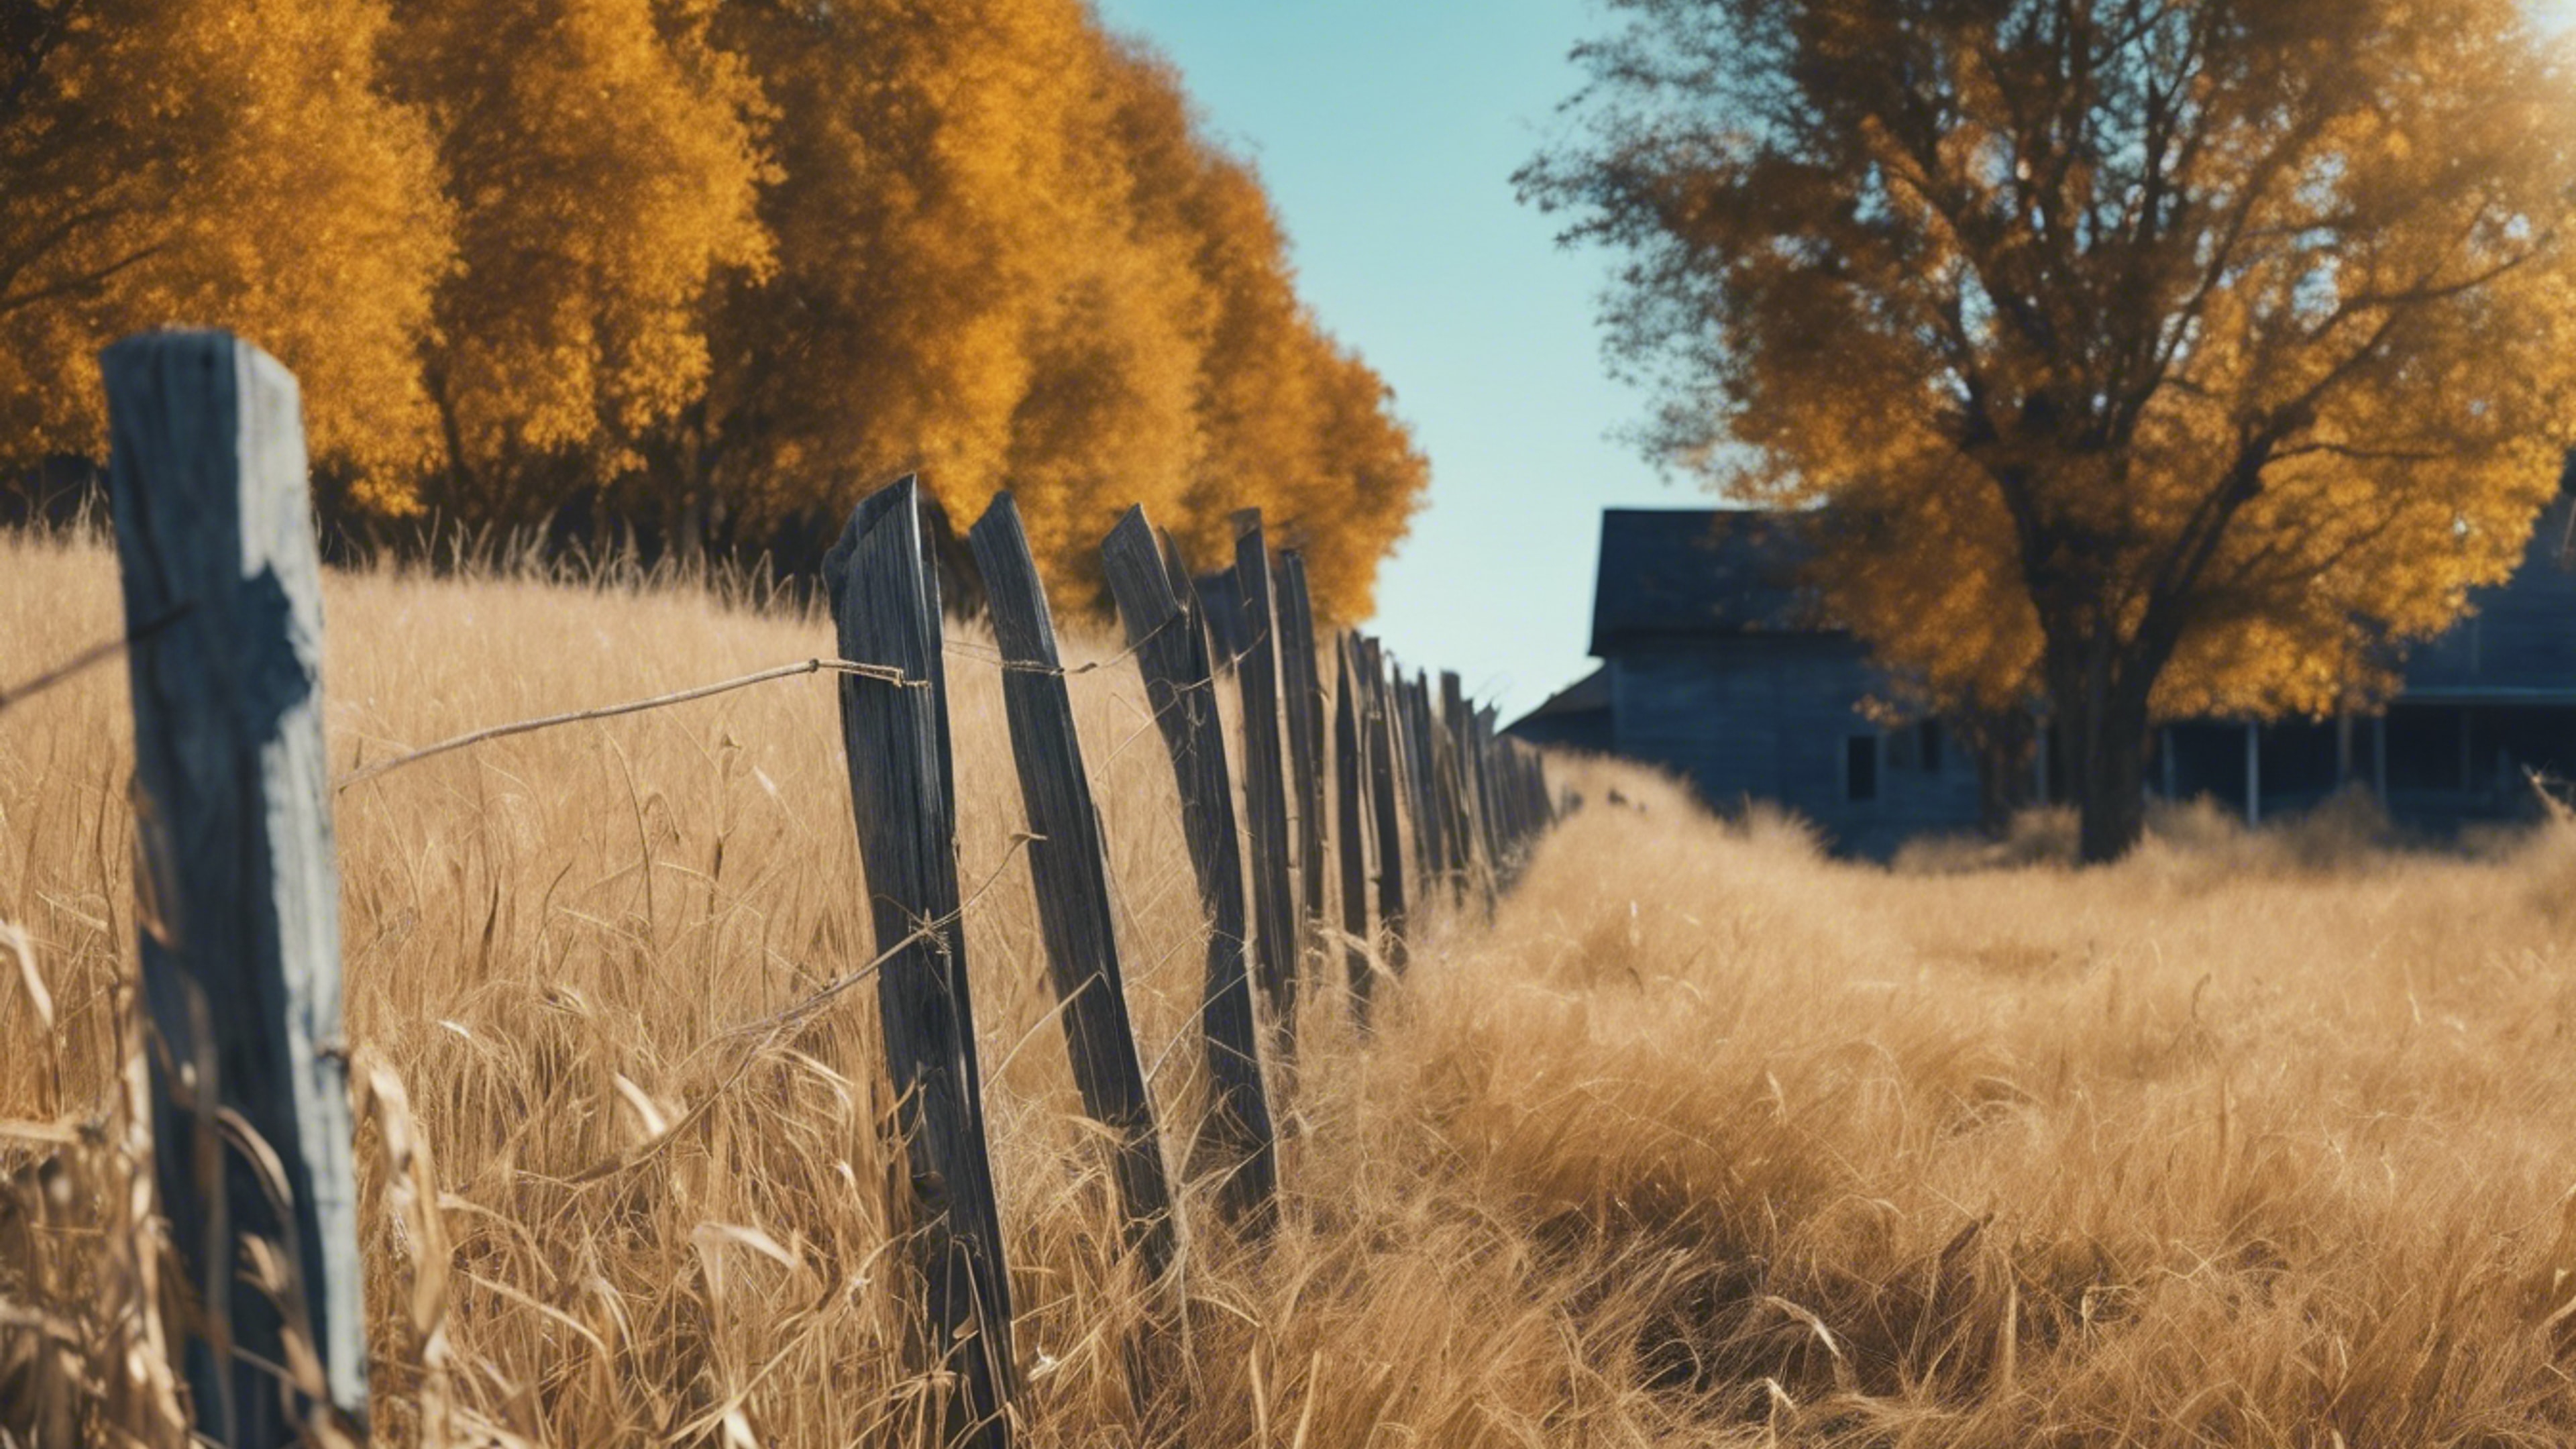 A weathered picket fence bordering a rustling cornfield, under the cool, crisp blue sky of a mid-autumn day. Wallpaper[baa0a360155c4d87a481]